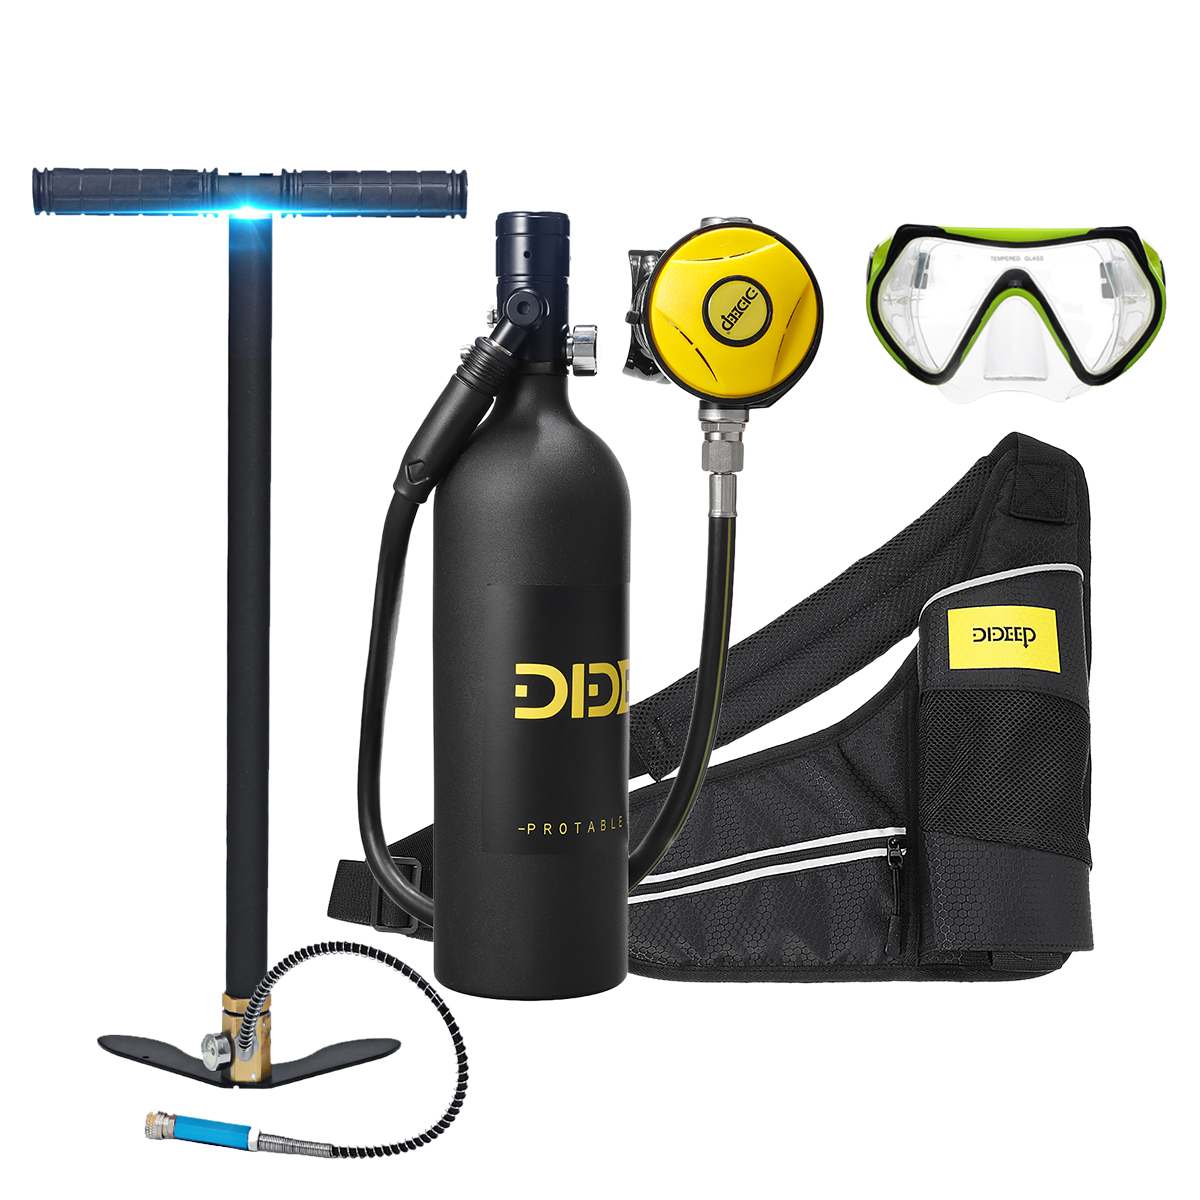 DIDEEP Scuba Diving Cylinder 1L Oxygen Tank Set Respirator Air Tank With Hand Pump & Diving Mask for Snorkeling Diving Equipment